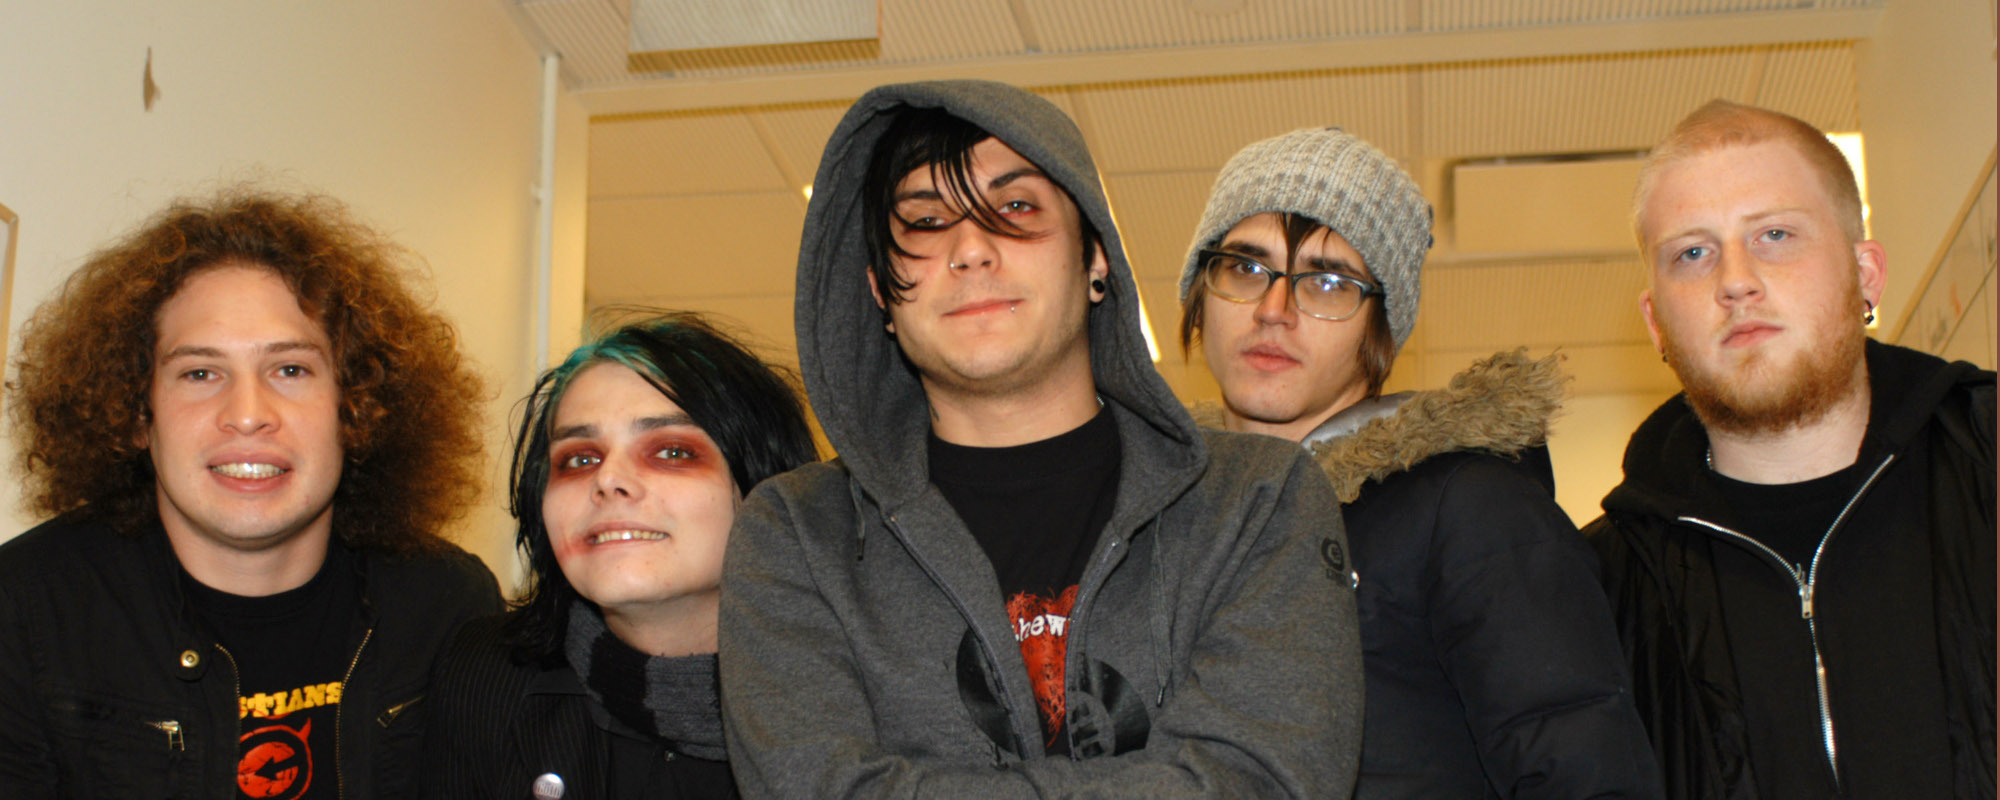 Behind The Band Name: My Chemical Romance